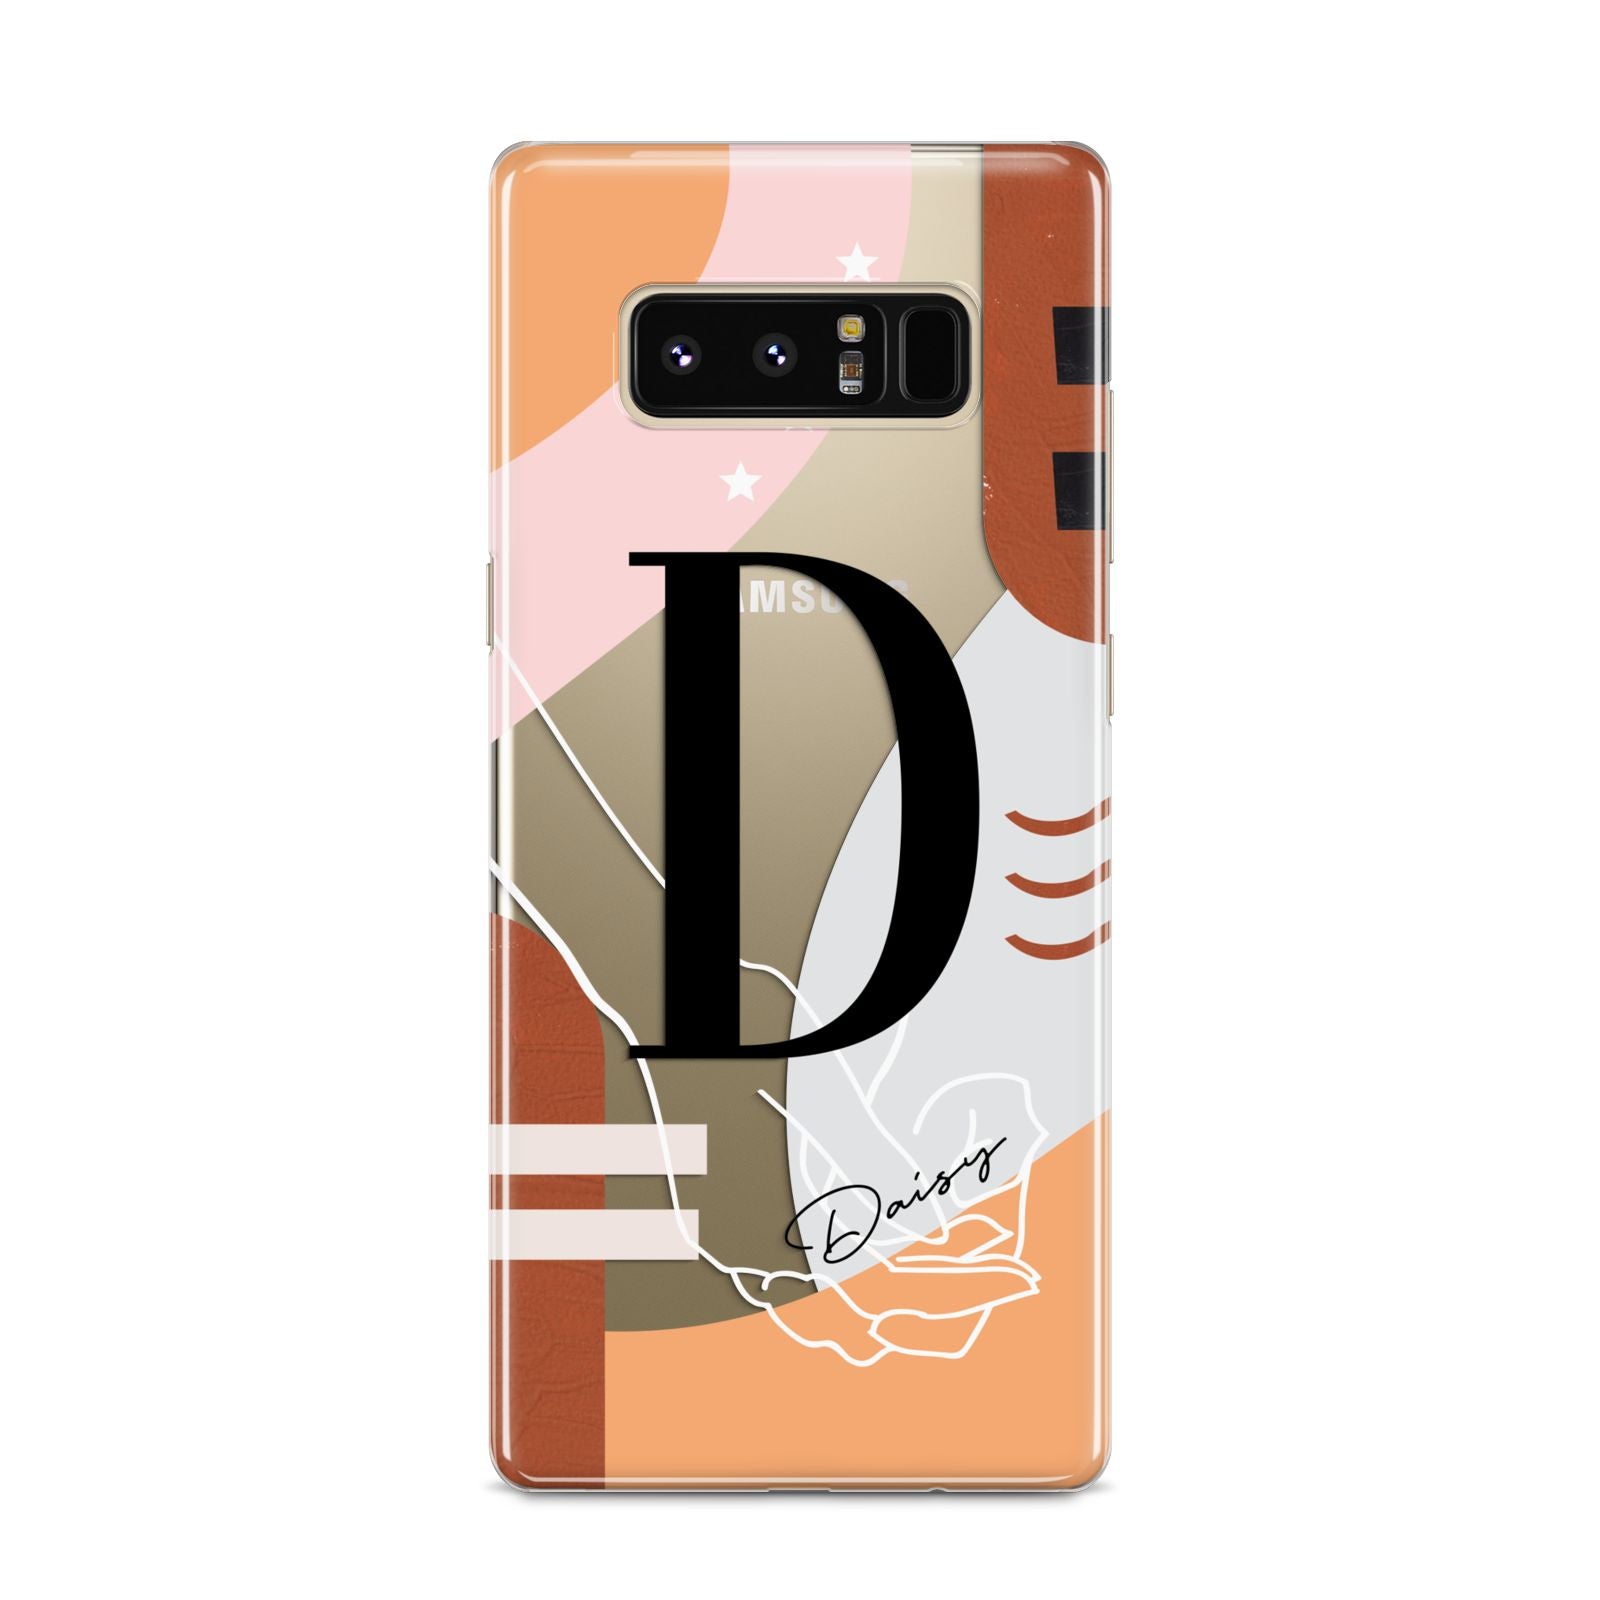 Personalised Abstract Samsung Galaxy S8 Case